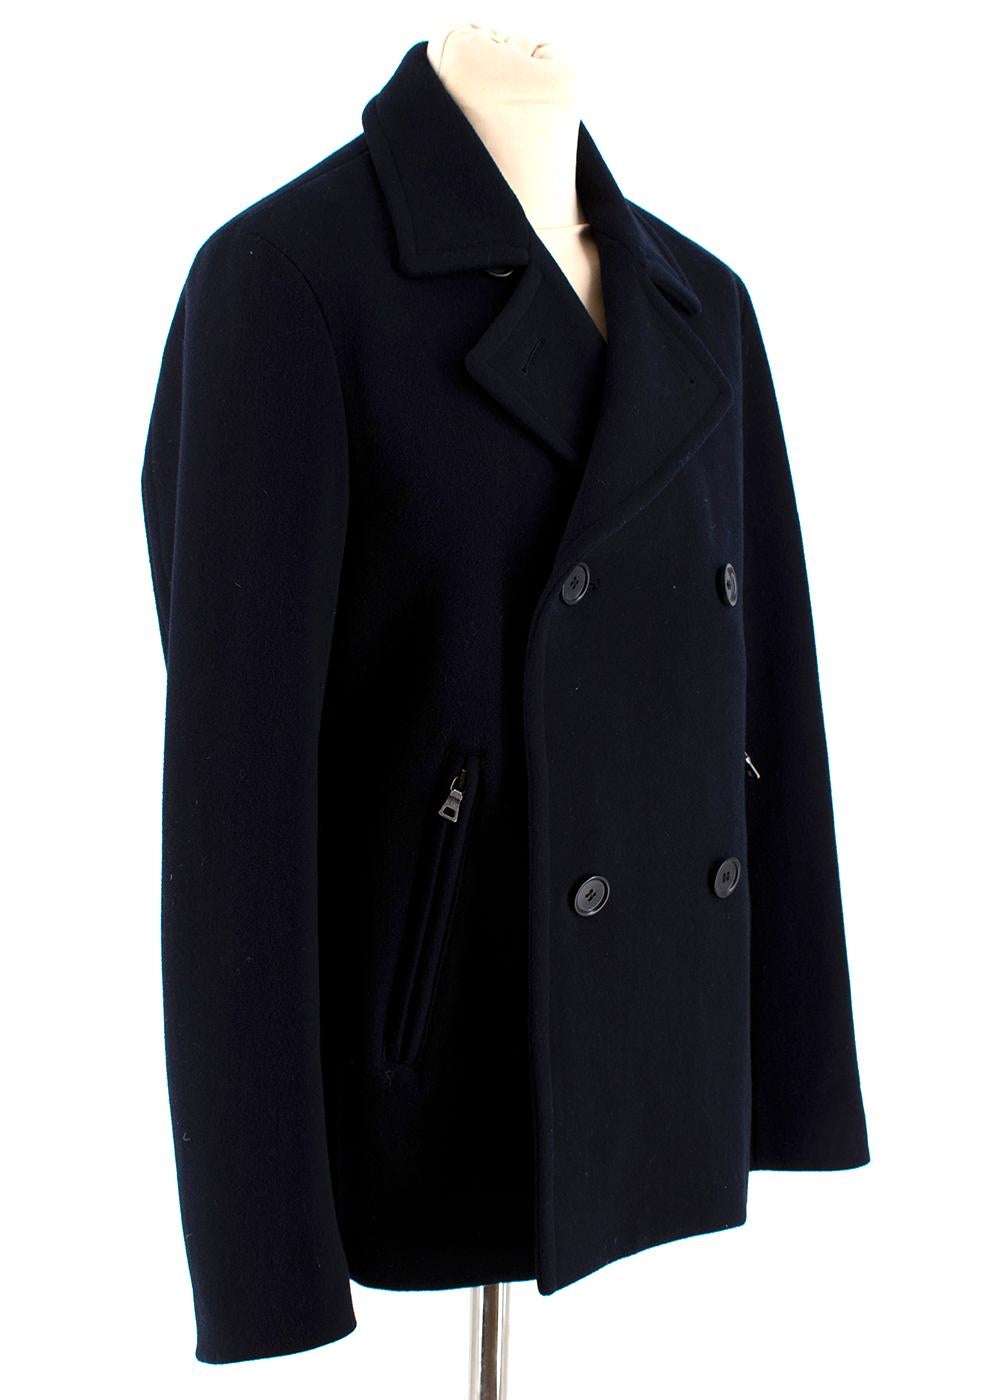 Prada Navy Blue Wool Peacoat

- Fully lined
- Double breasted
- Interior pockets
- Two exterior zipped pockets

Materials:
100% Virgin Wool

Made in Italy
Professional Dry Clean

Measurements:
Approx. 
Shoulders 44cm
Sleeves 65cm
Chest 52cm
Length